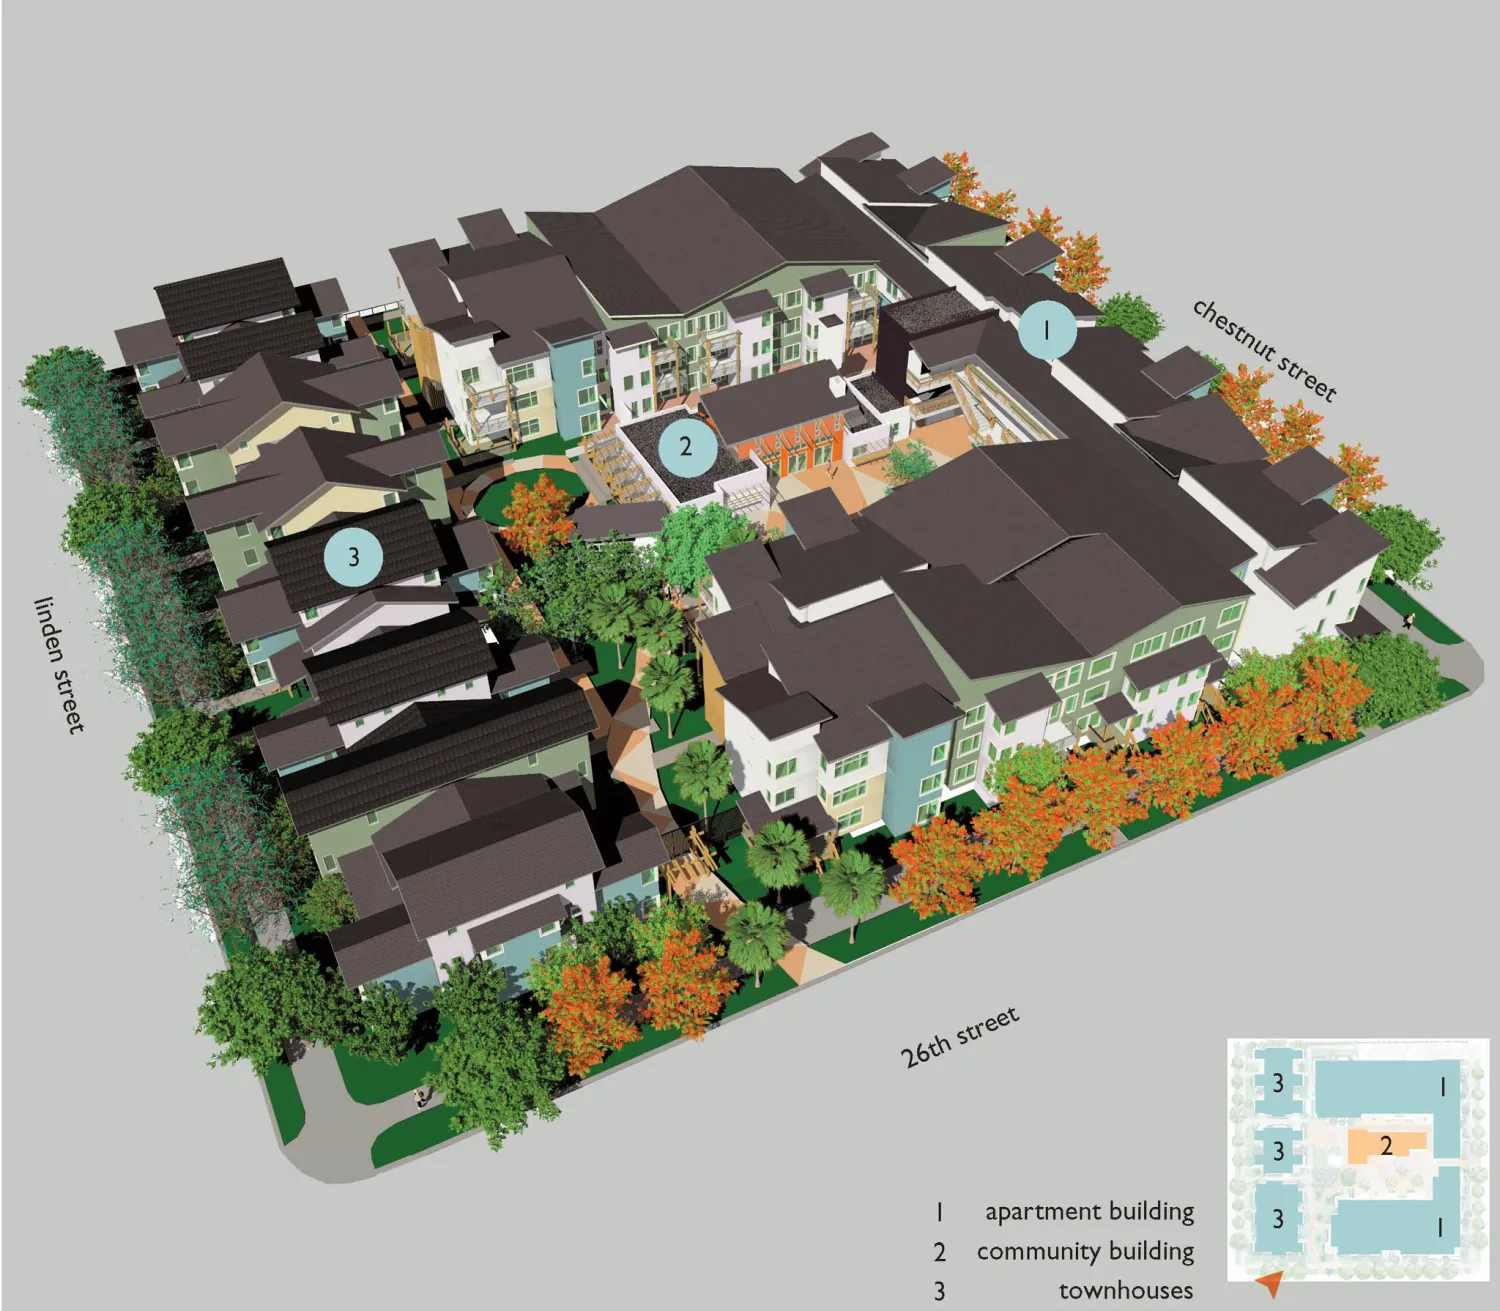 Rendered site plan for Linden Court in Oakland, California.